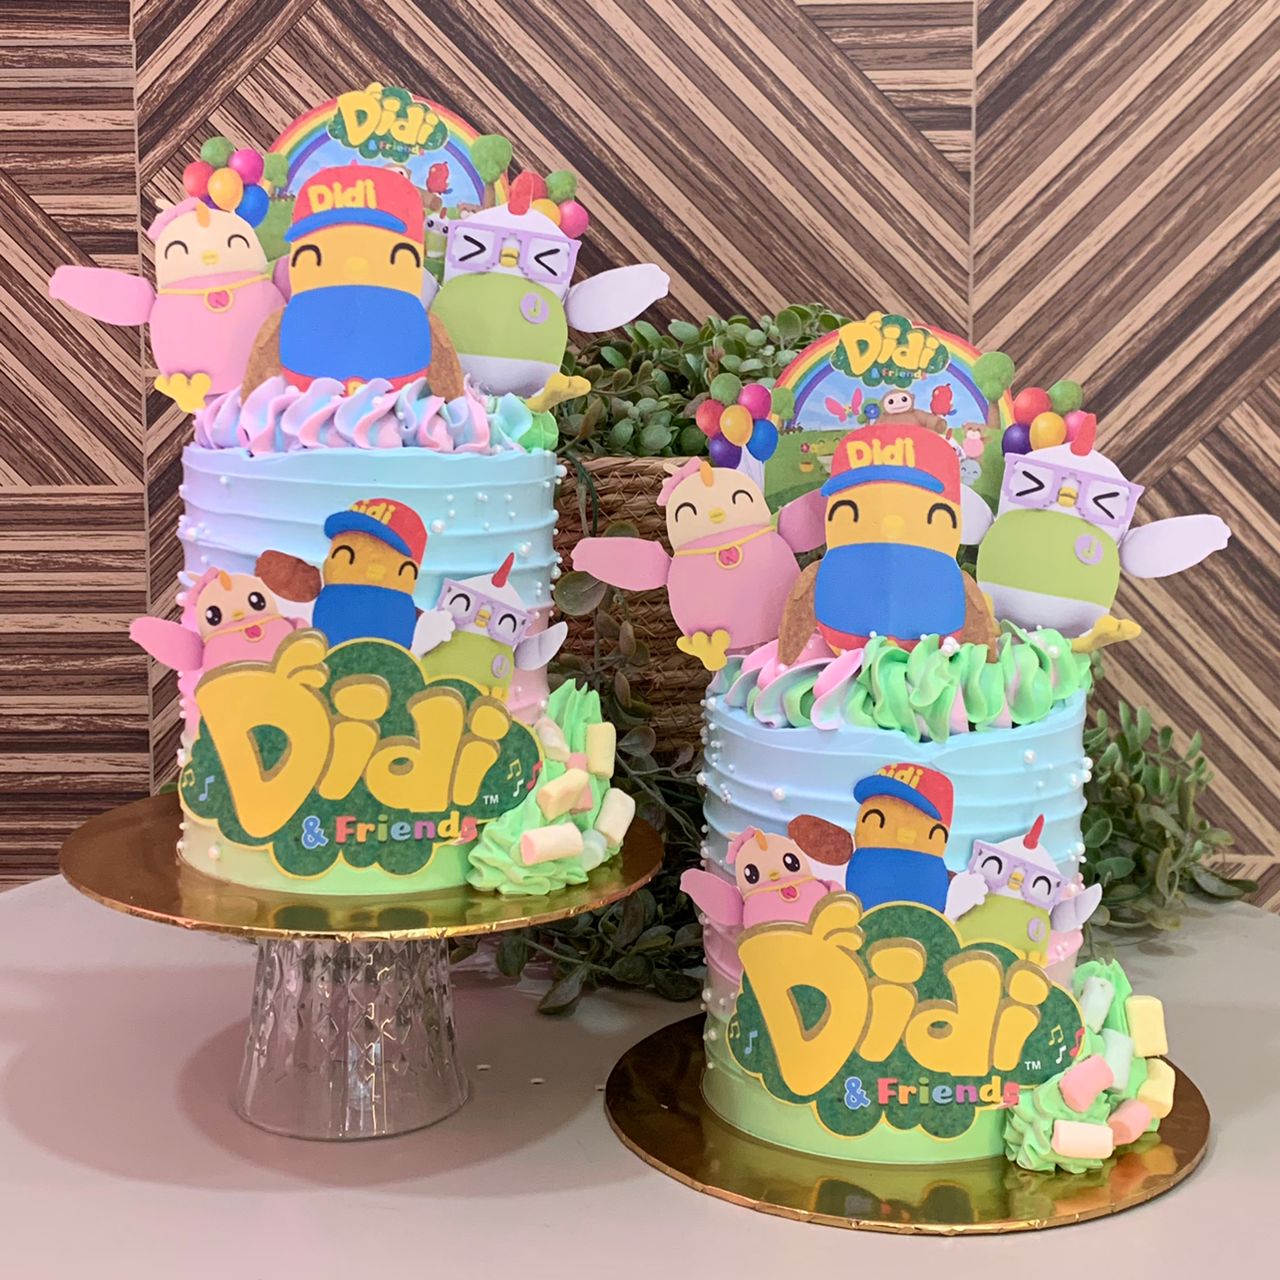 Didi & Friends (DDNF) YouTube Stars, Cake Toppers DESIGN 2 Hand-Crafted. |  Omar and Hana YouTube Stars